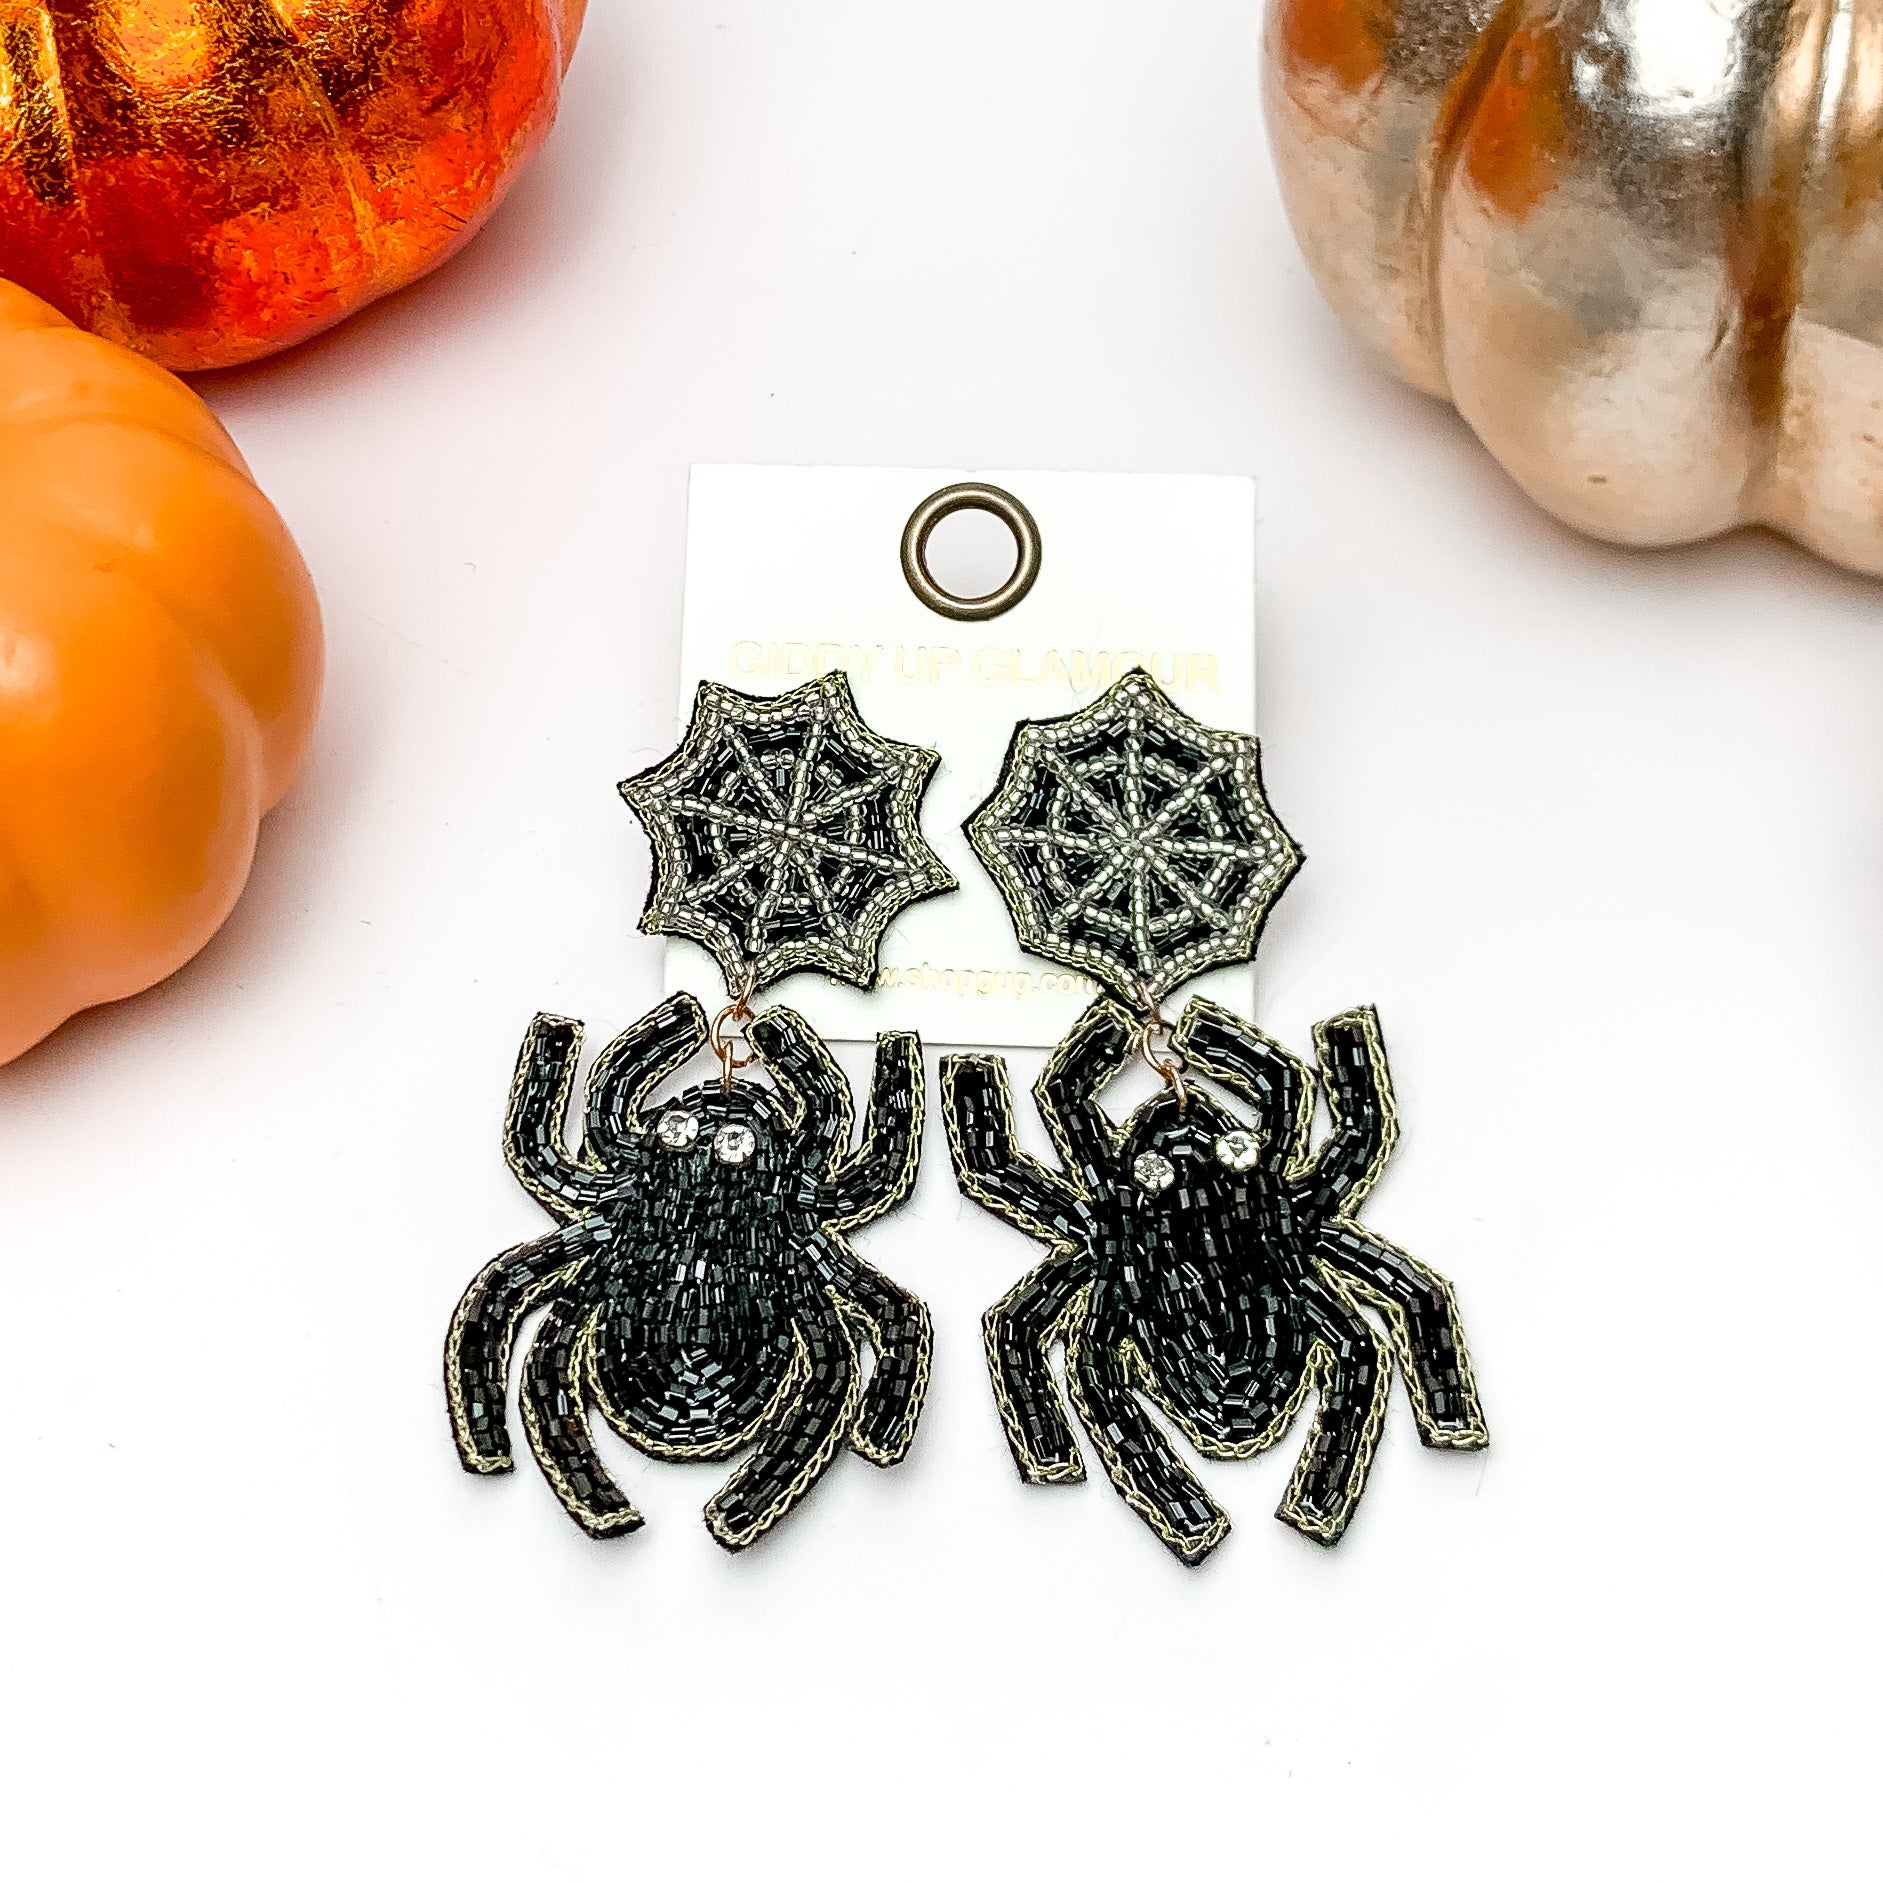 Beaded Spider Earrings With Web Post in Black. These earrings are on a white background with orange and silver pumpkins around them.